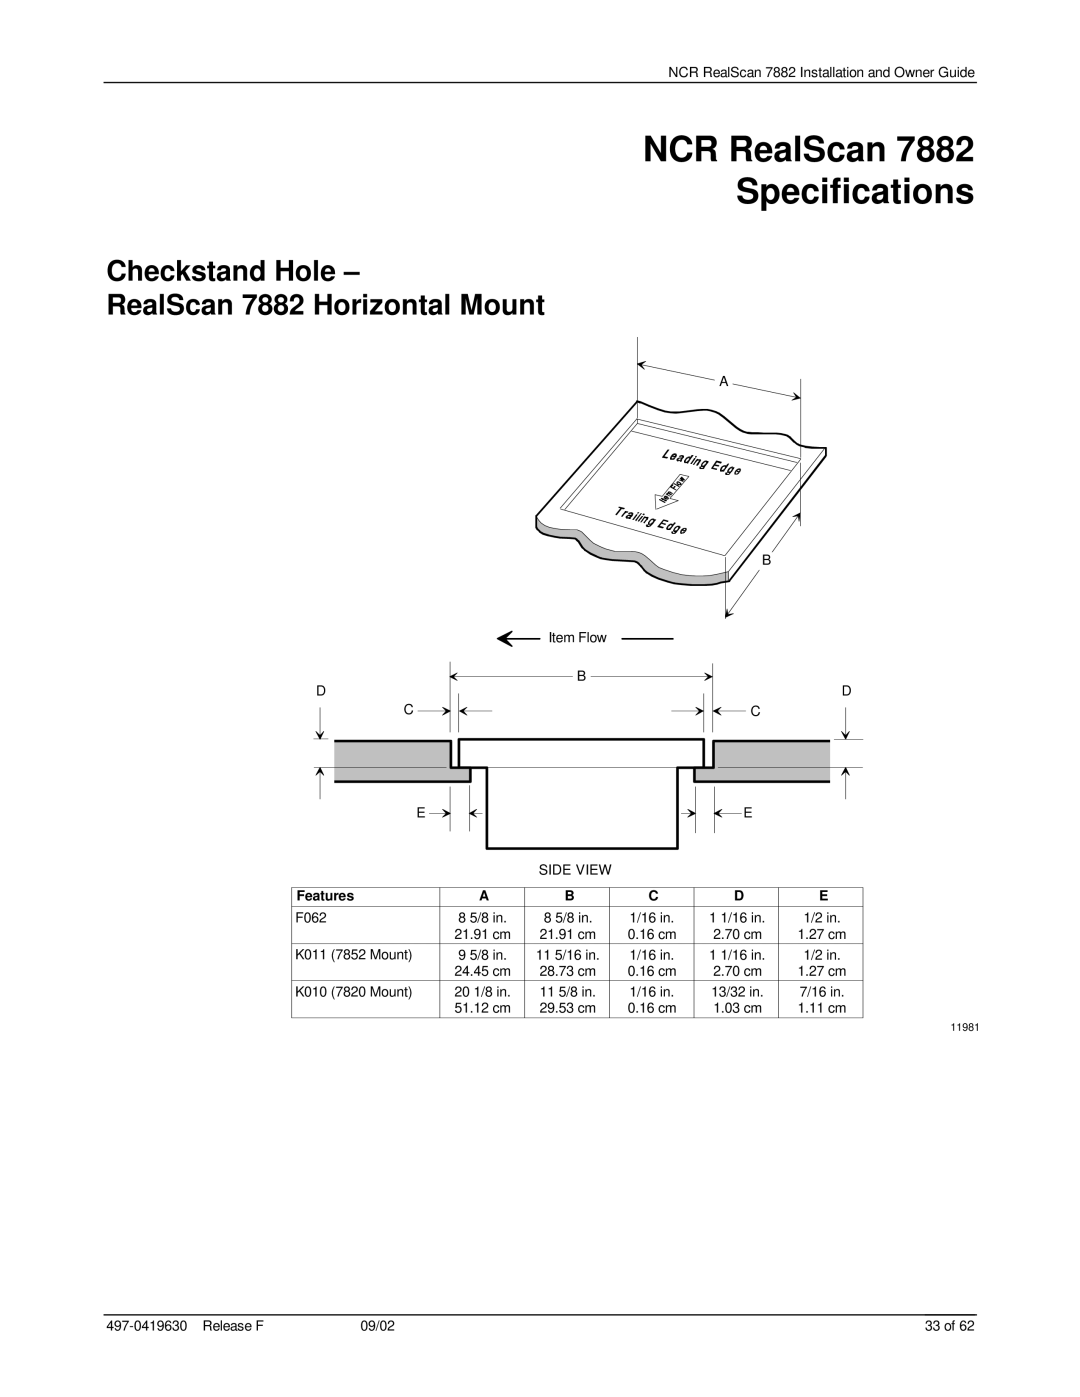 NCR manual NCR RealScan Specifications, Checkstand Hole RealScan 7882 Horizontal Mount 